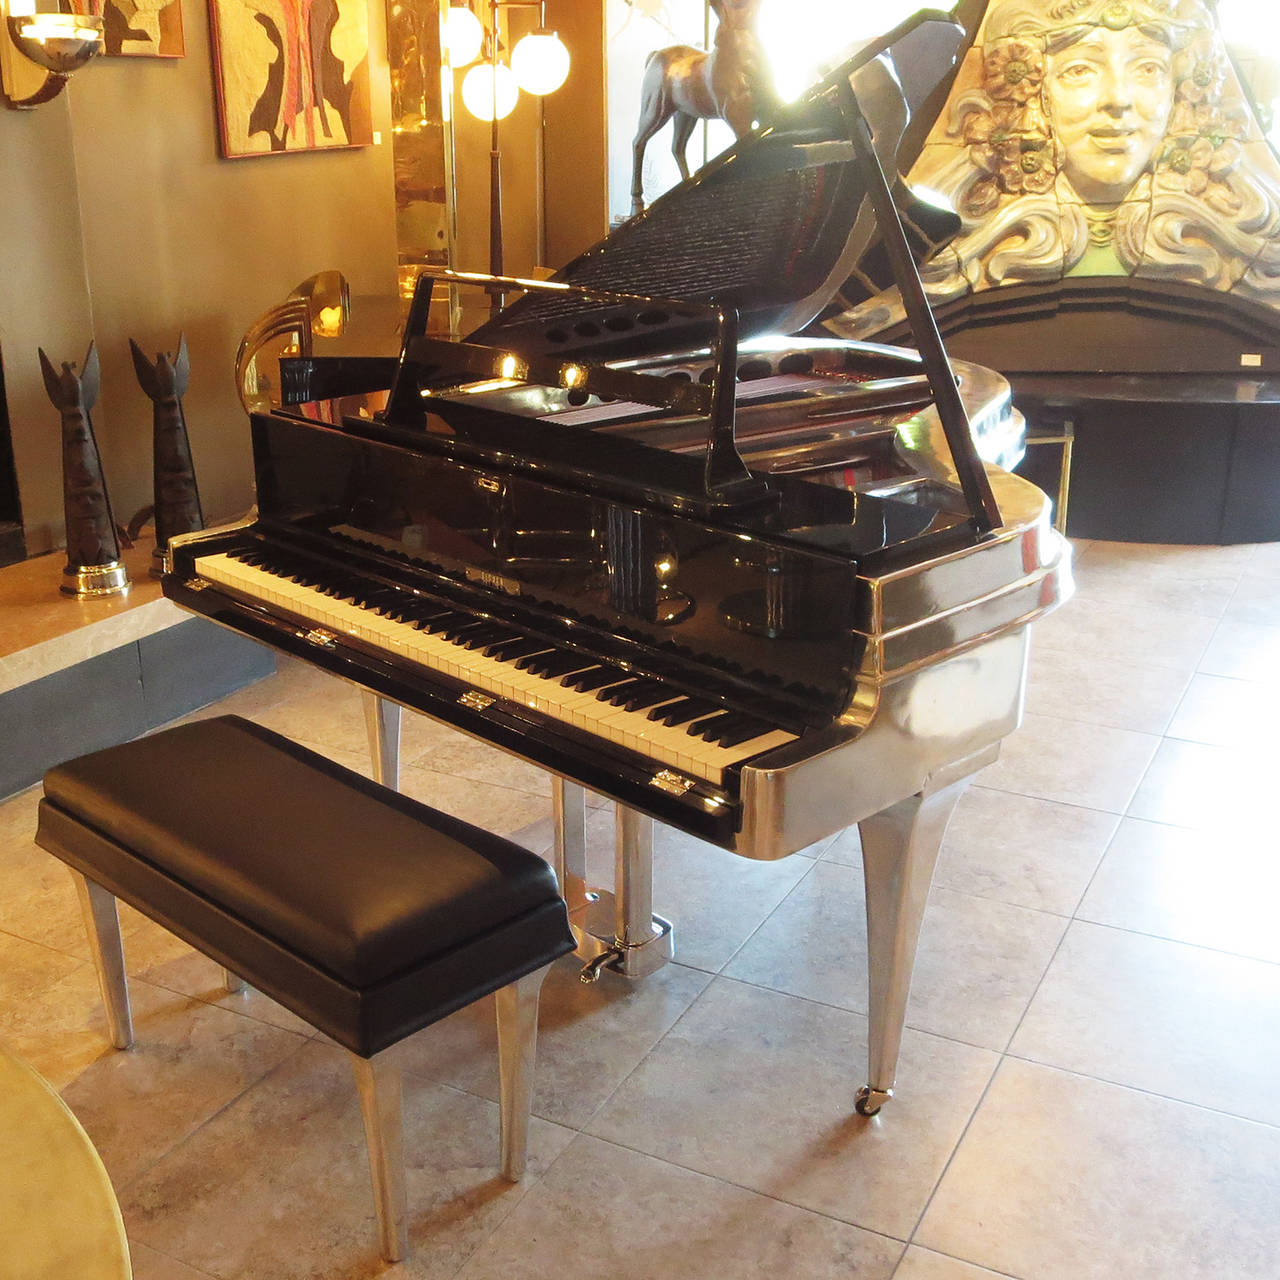 A fantastic instrument cased in an unbelievable cabinet design! The Rippen aluminum bodied piano was a revolutionary design when introduced in the mid 1950's. The tensile strength of the cast metal allowed the profile to be much thinner, while